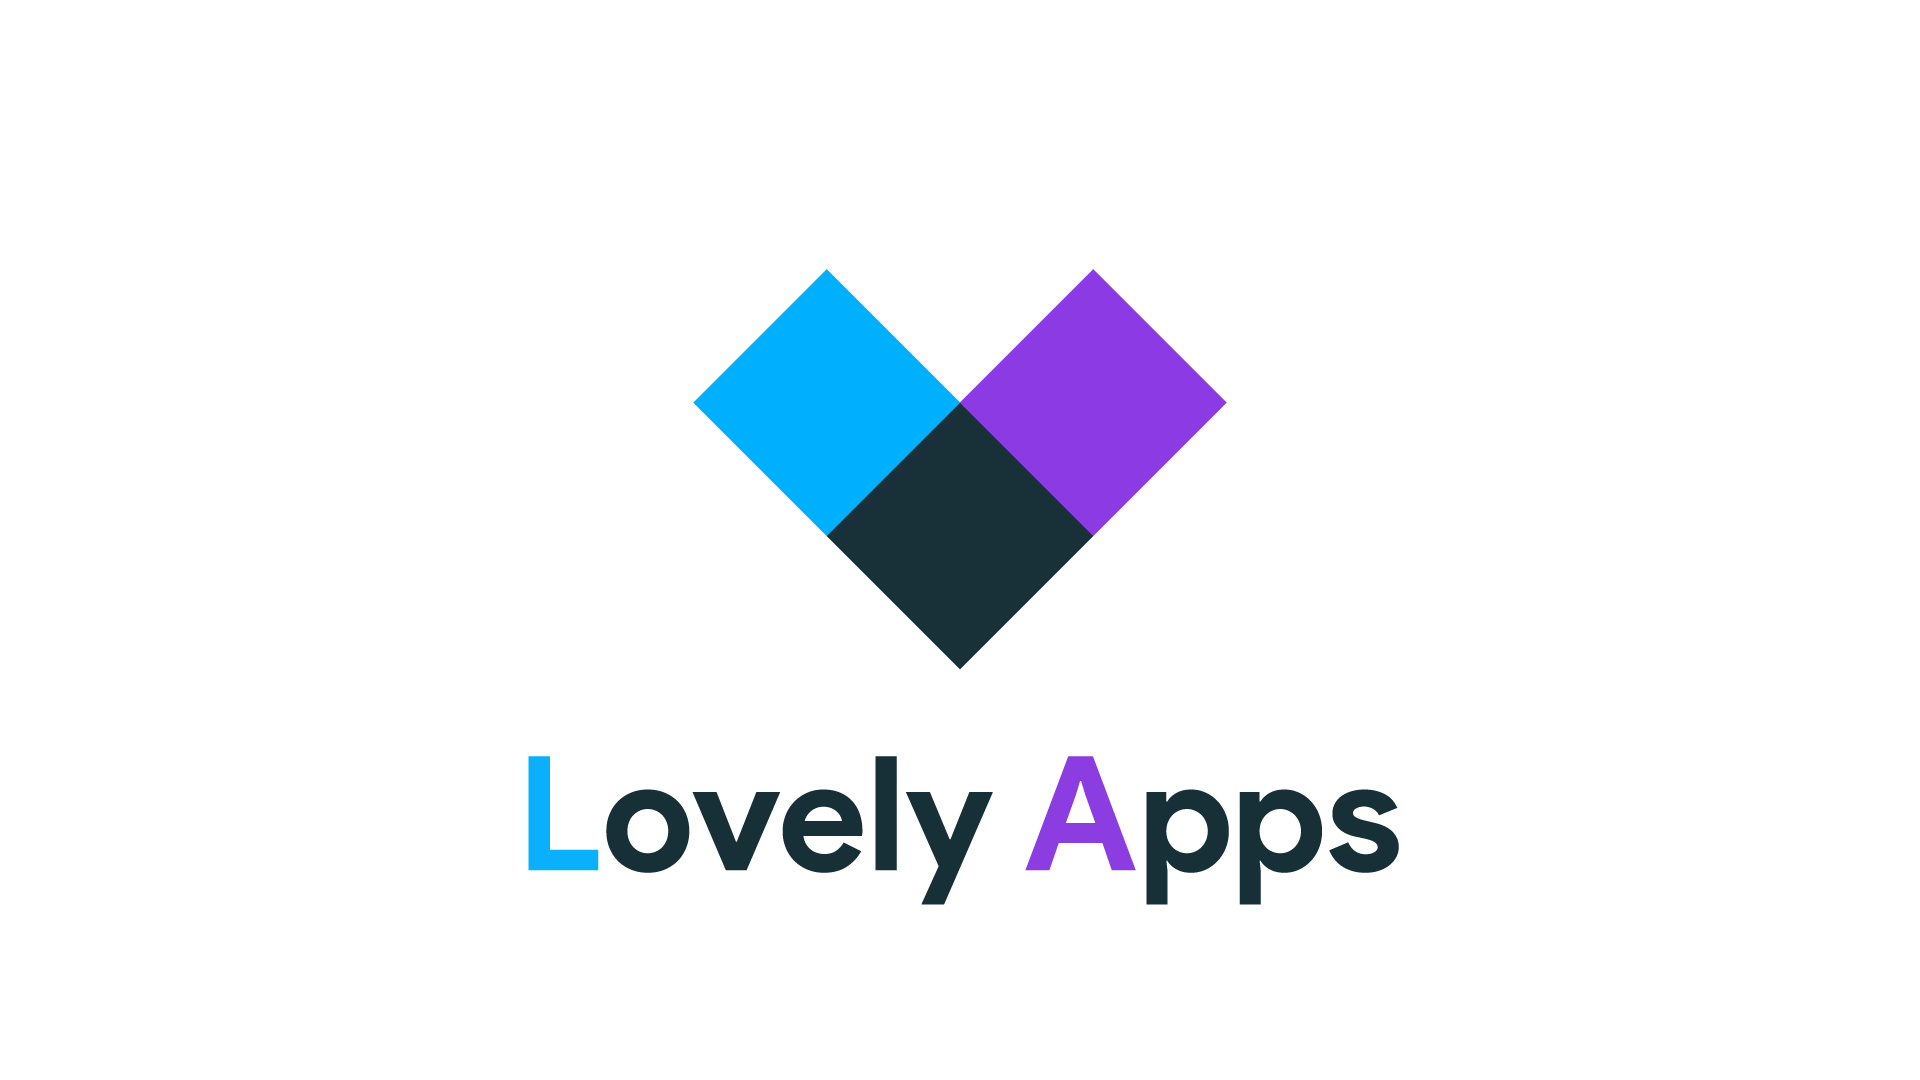 Lovely Apps – New Section